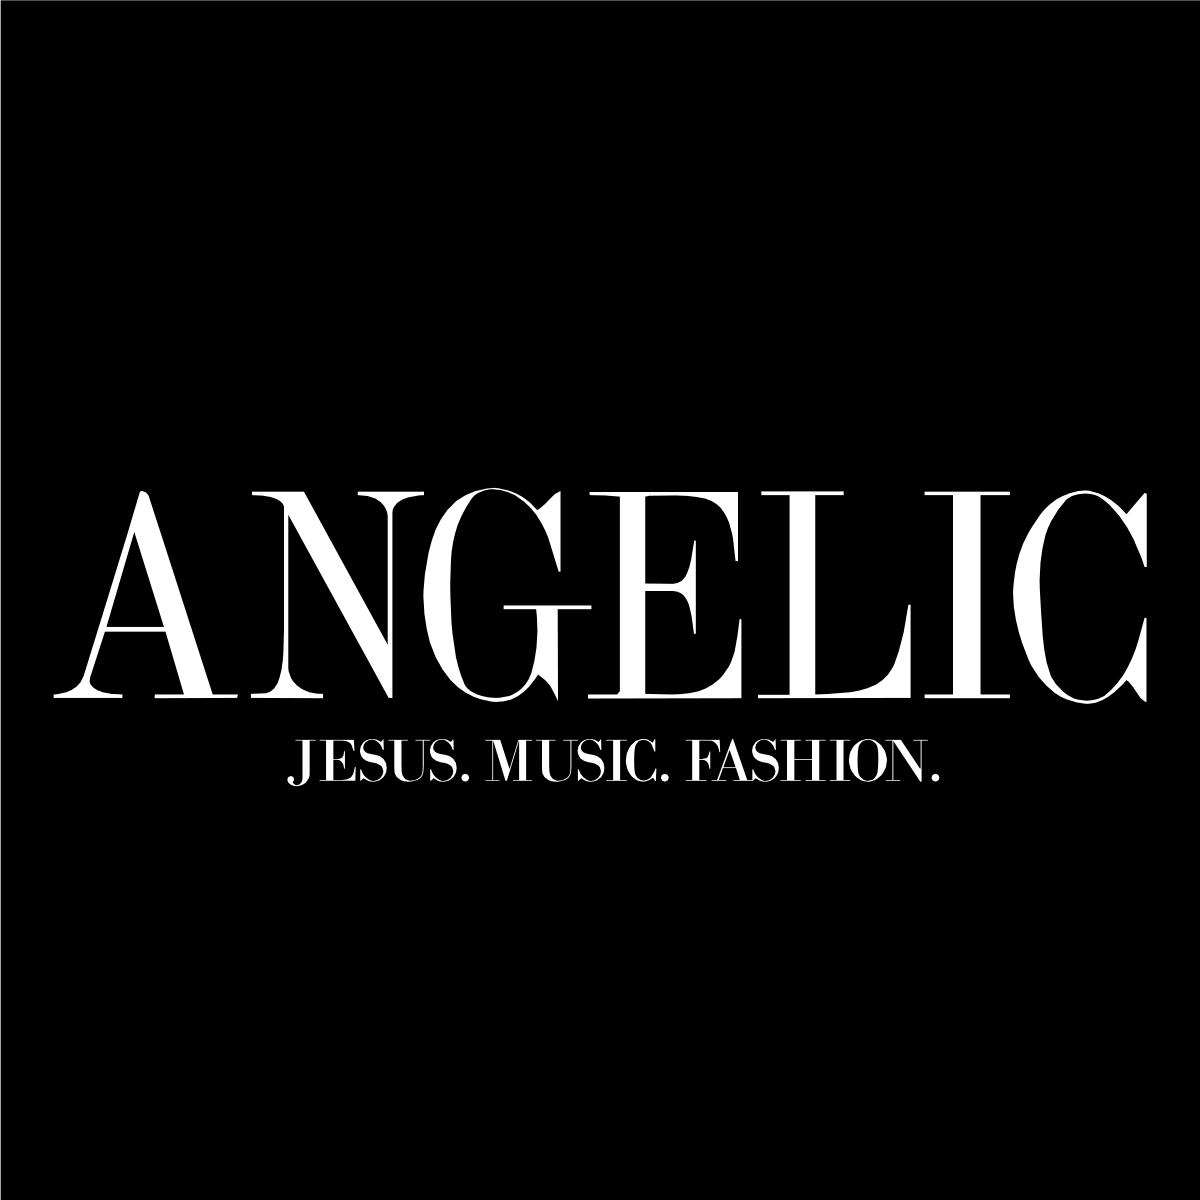 http://www.angelicmag.com/